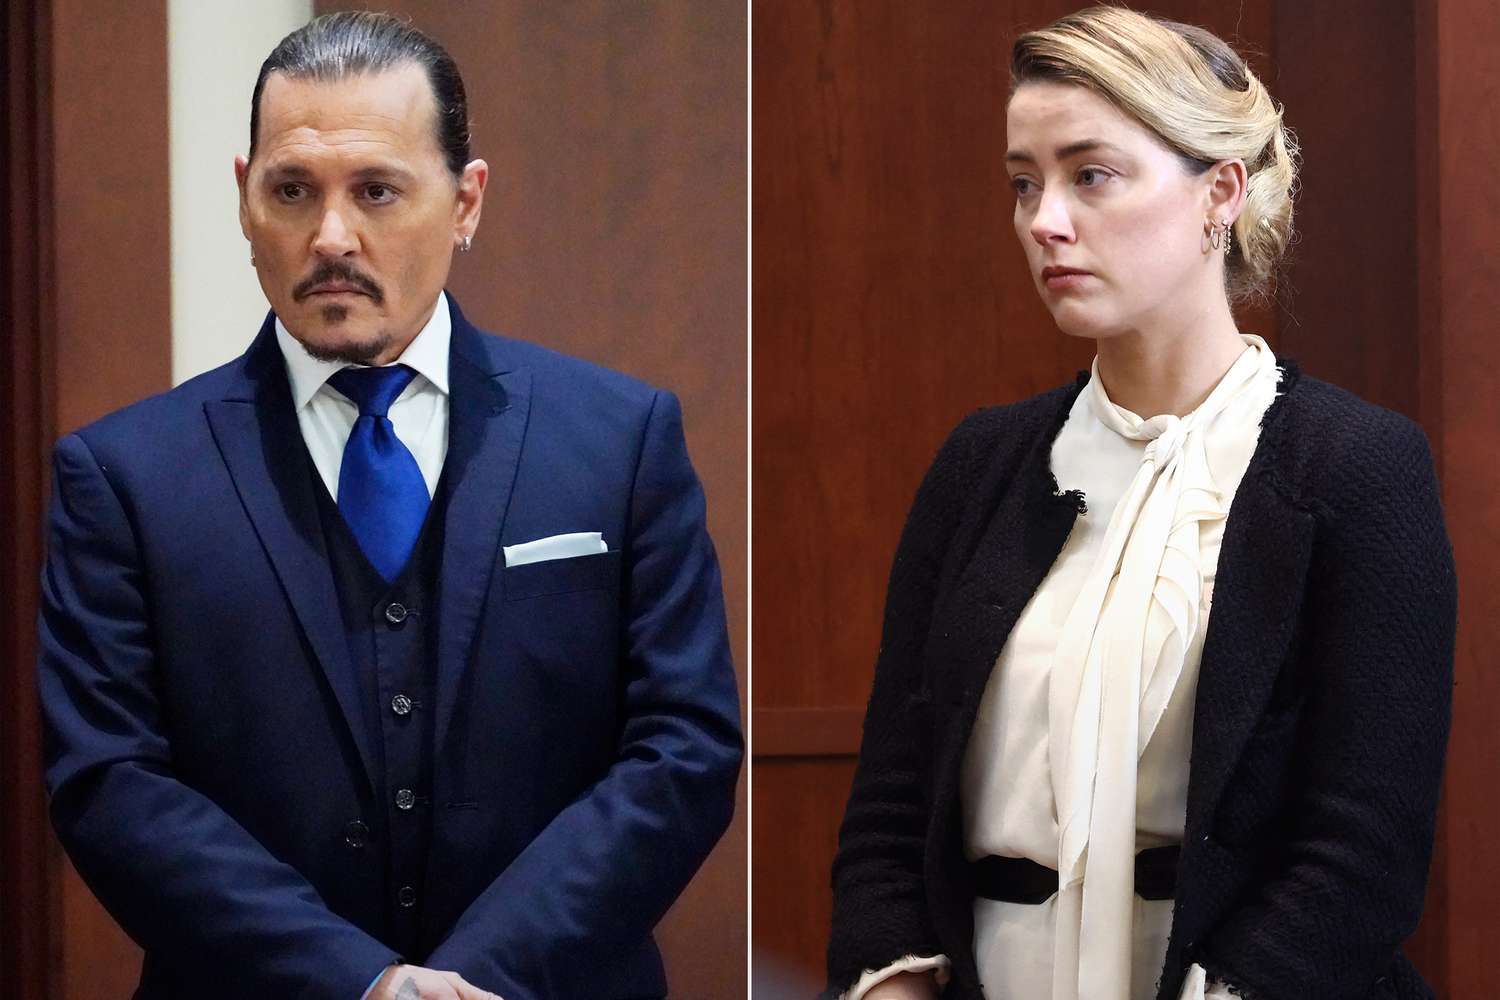 Johnny Depp testifies in the courtroom at the Fairfax County Circuit Courthouse in Fairfax, Virginia, April 25, 2022. - Actor Johnny Depp sued his ex-wife Amber Heard for libel in Fairfax County Circuit Court after she wrote an op-ed piece in The Washington Post in 2018 referring to herself as a 